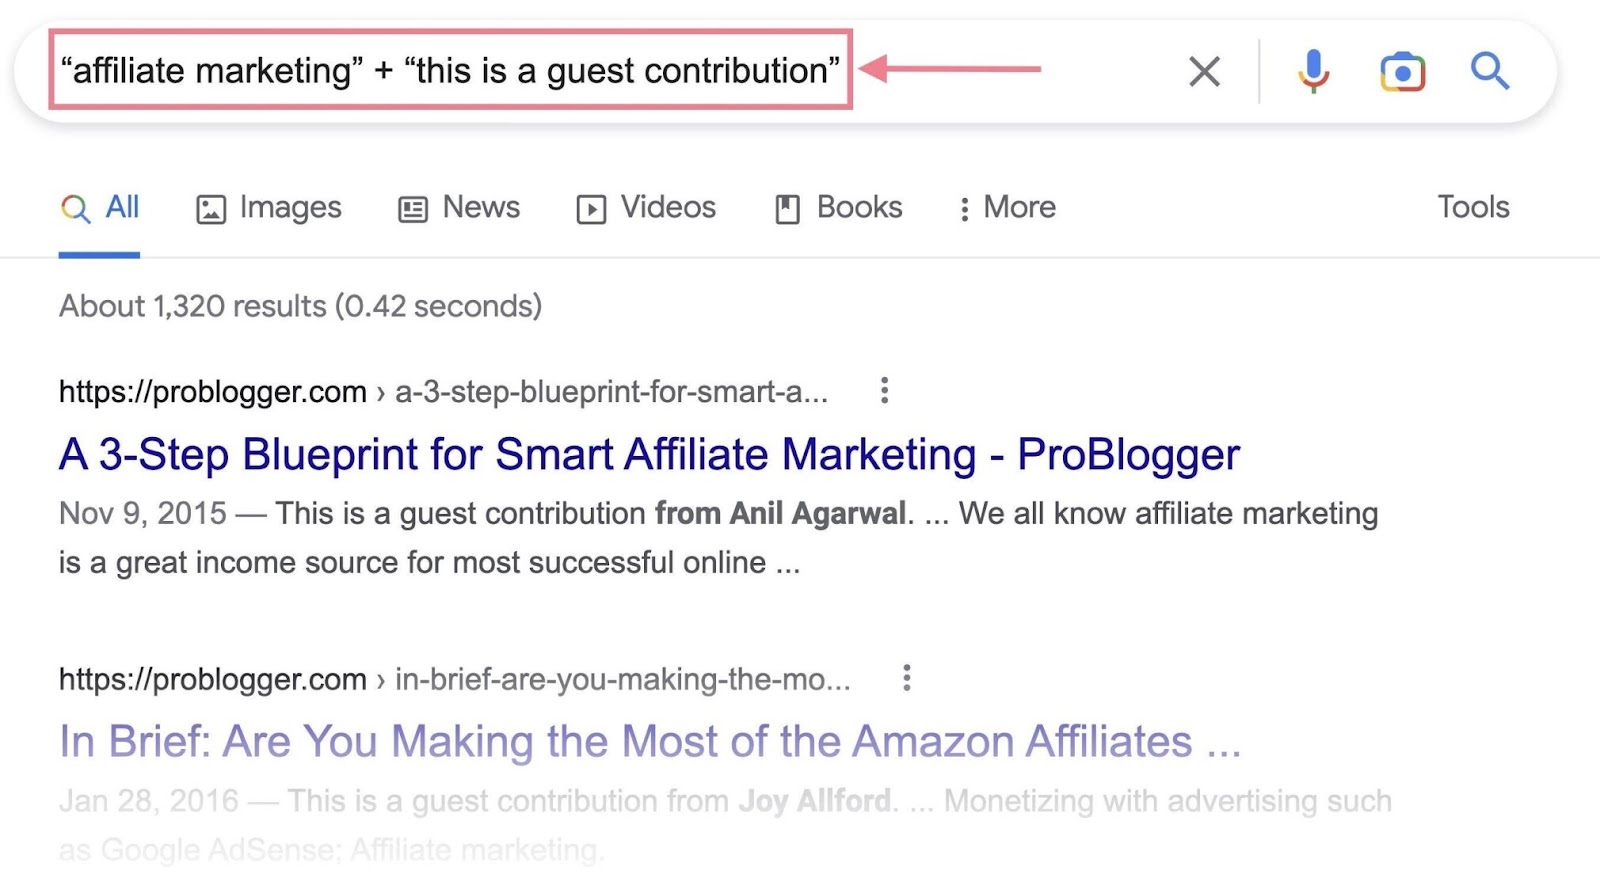 Google search for "affiliate marketing” + “this is a guest contribution"